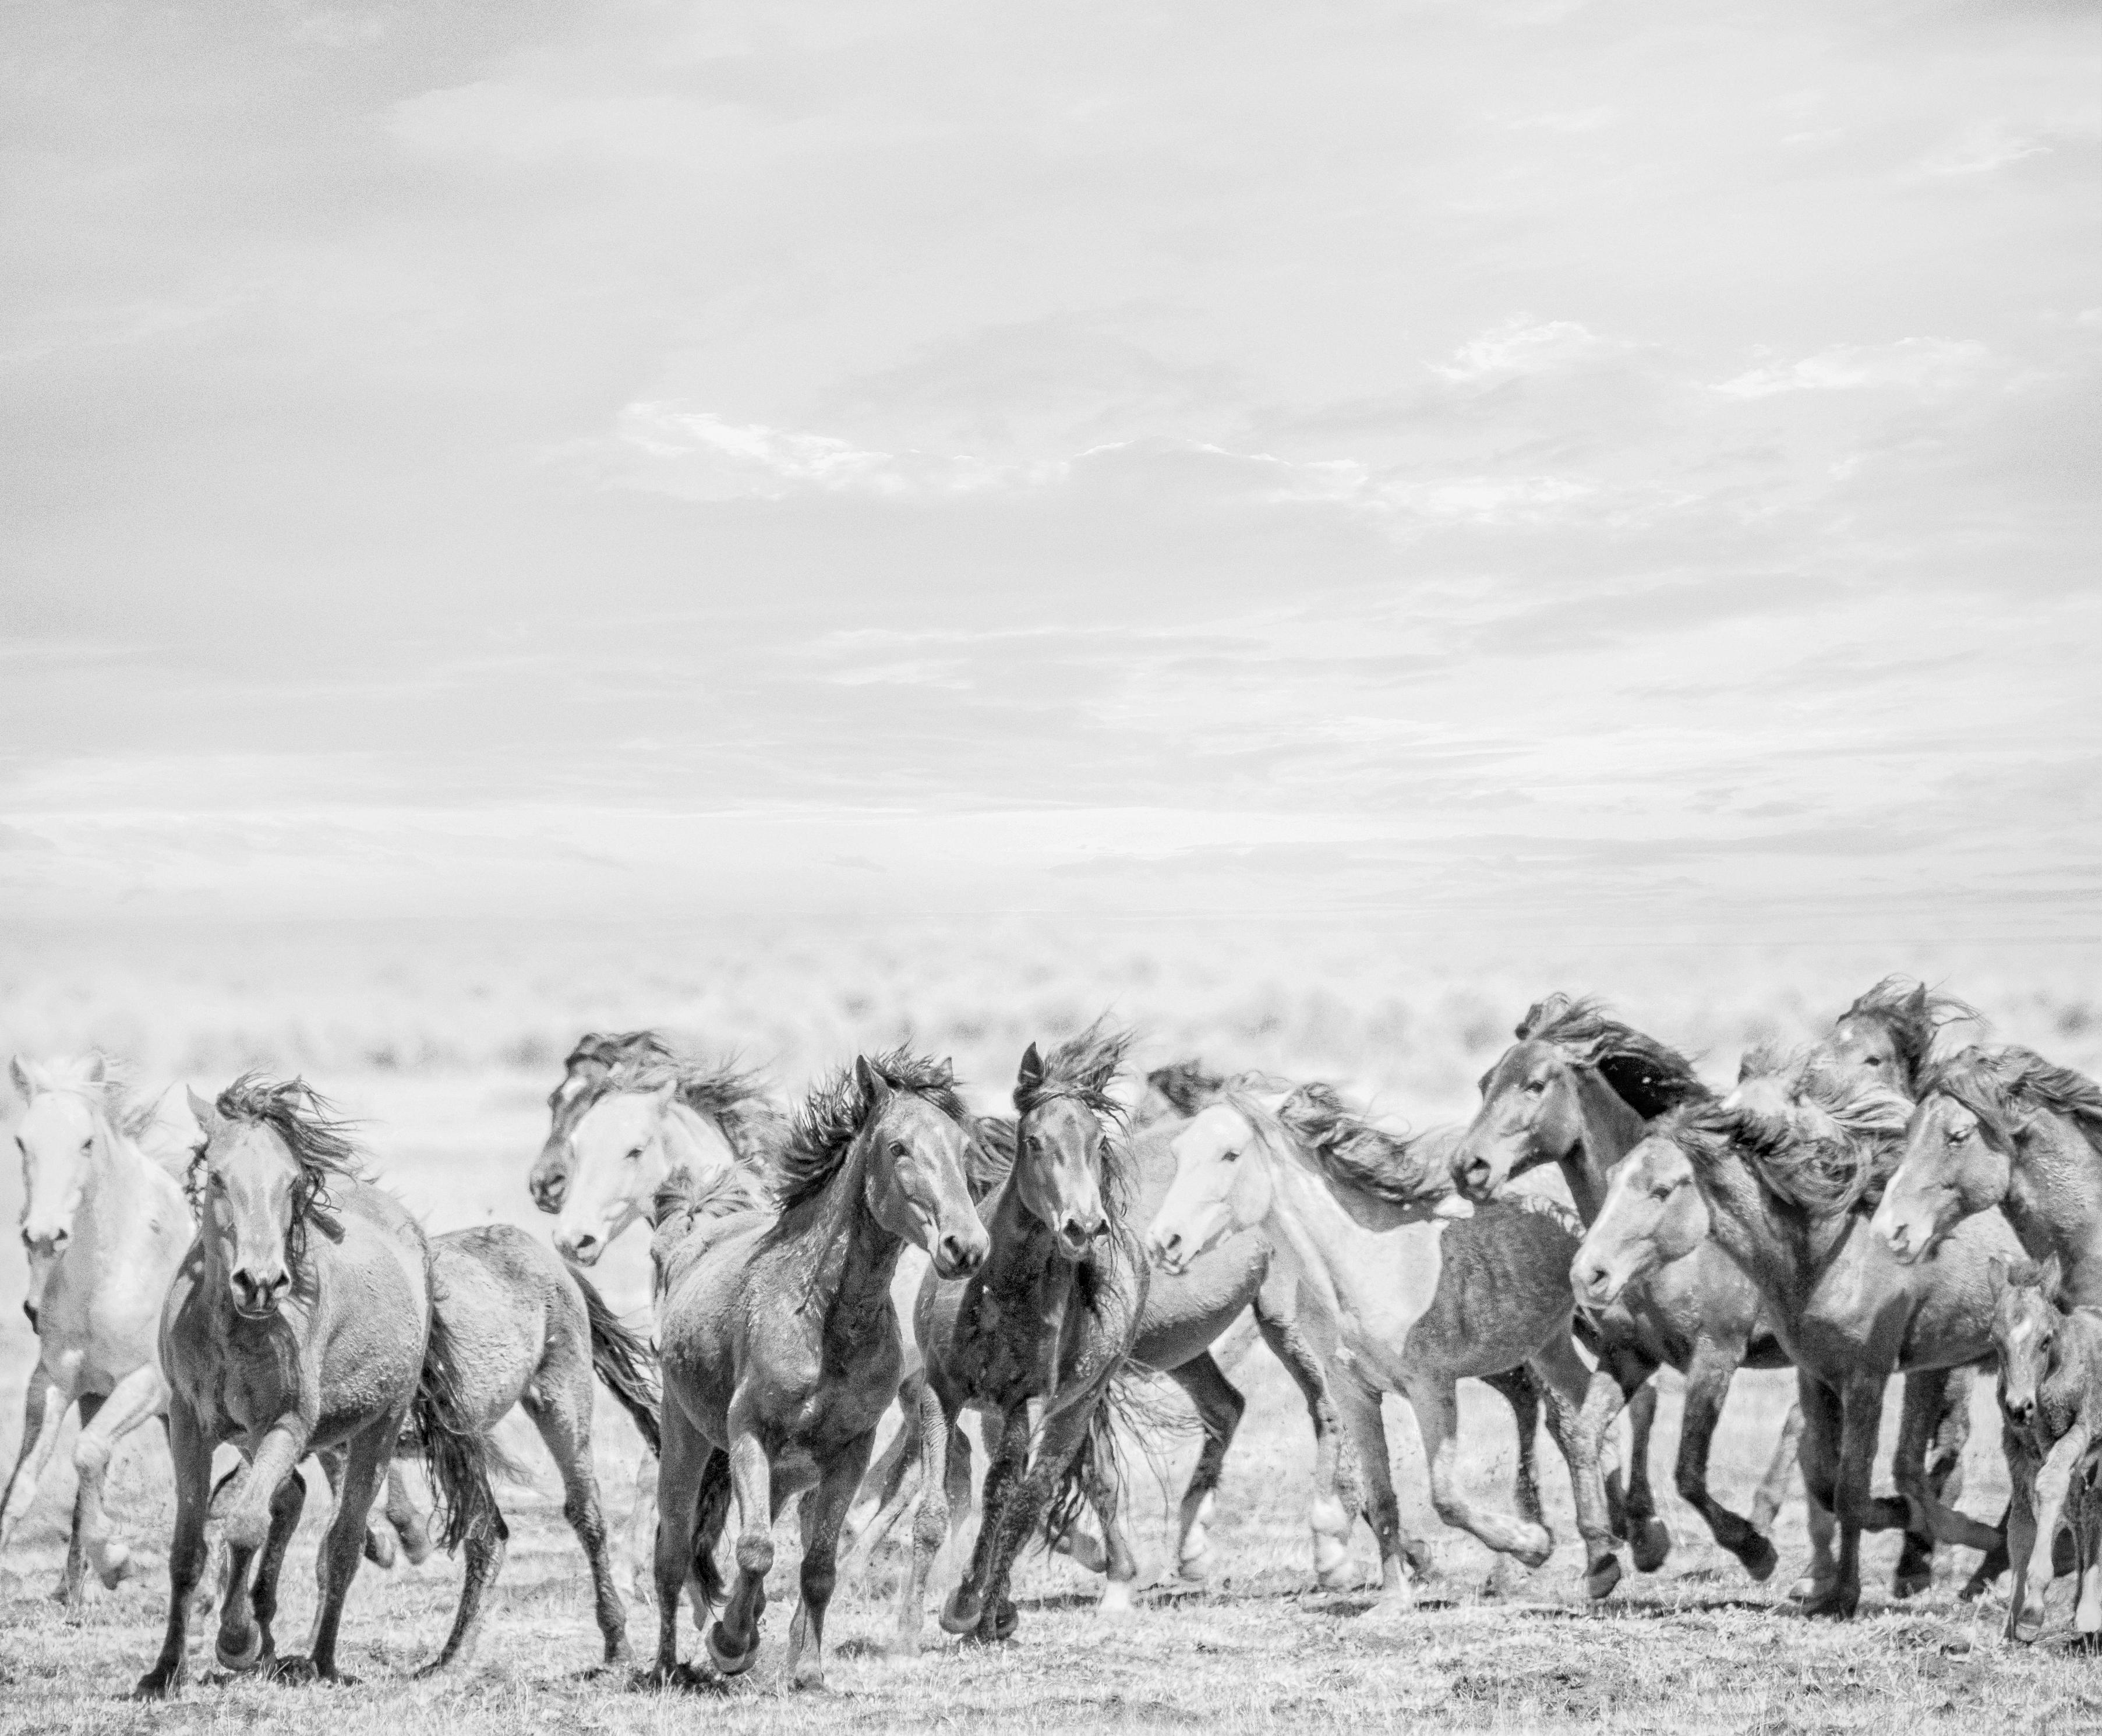 Shane Russeck Black and White Photograph - "Go West"  36x48 Black & White Photography of Wild Horses Mustangs - Unsigned